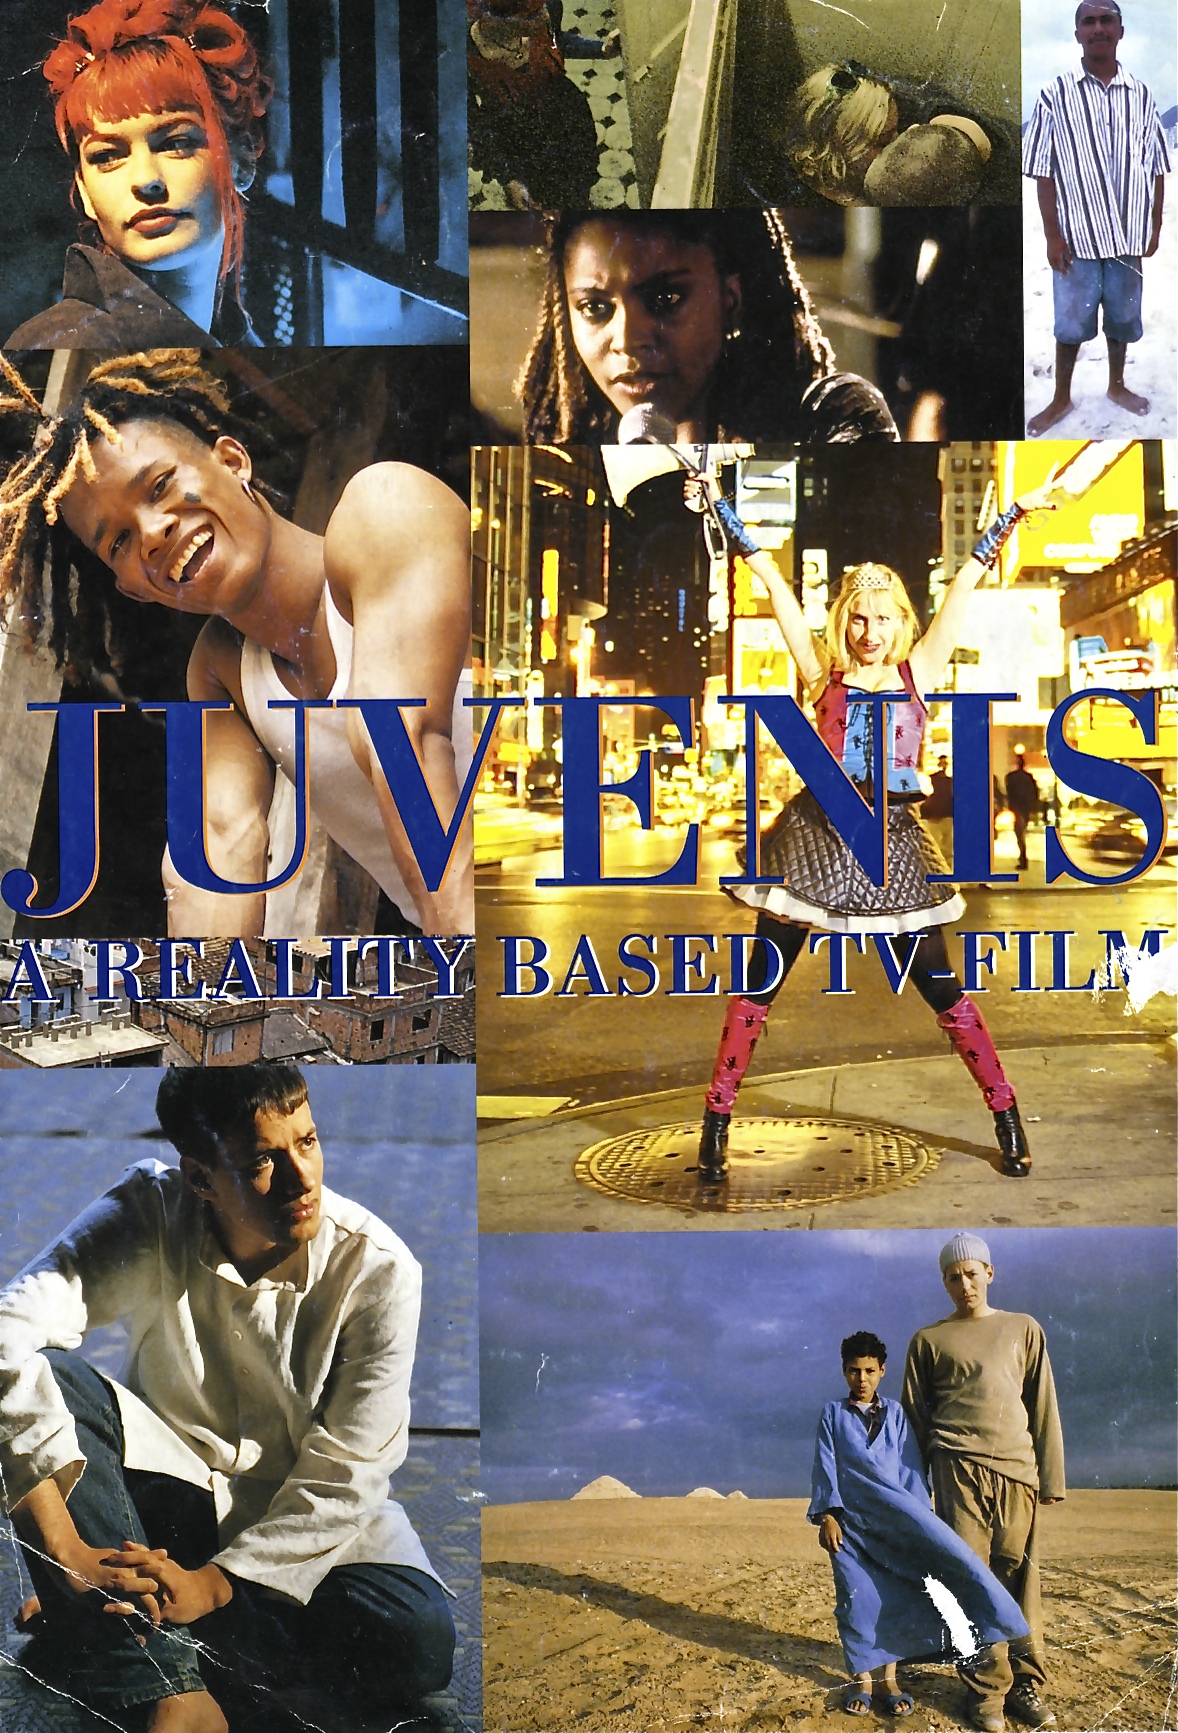 Global Youth - Juvenis